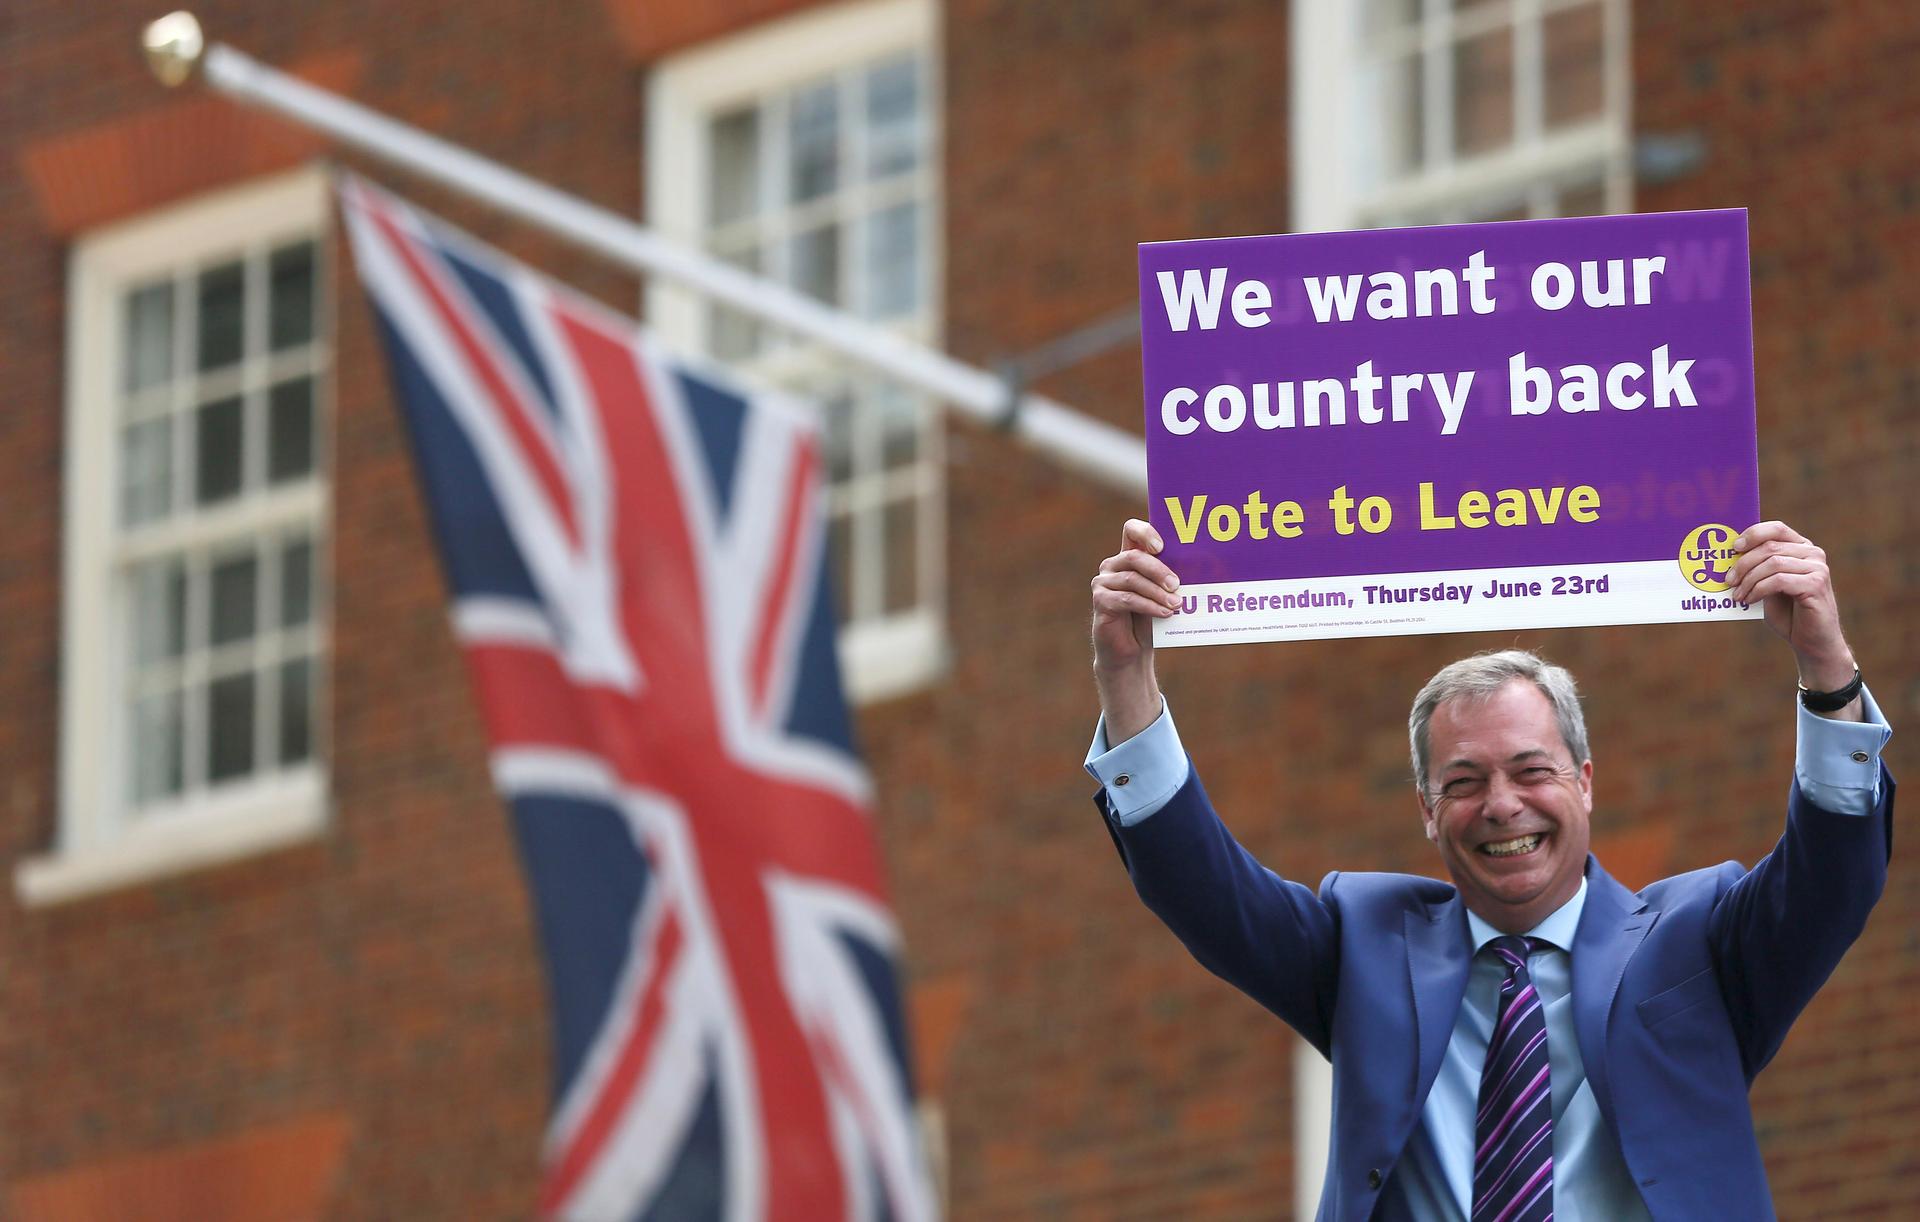 Nigel Farage moved the UK Independence Party from the fringes of British politics to victory in the Brexit referendum